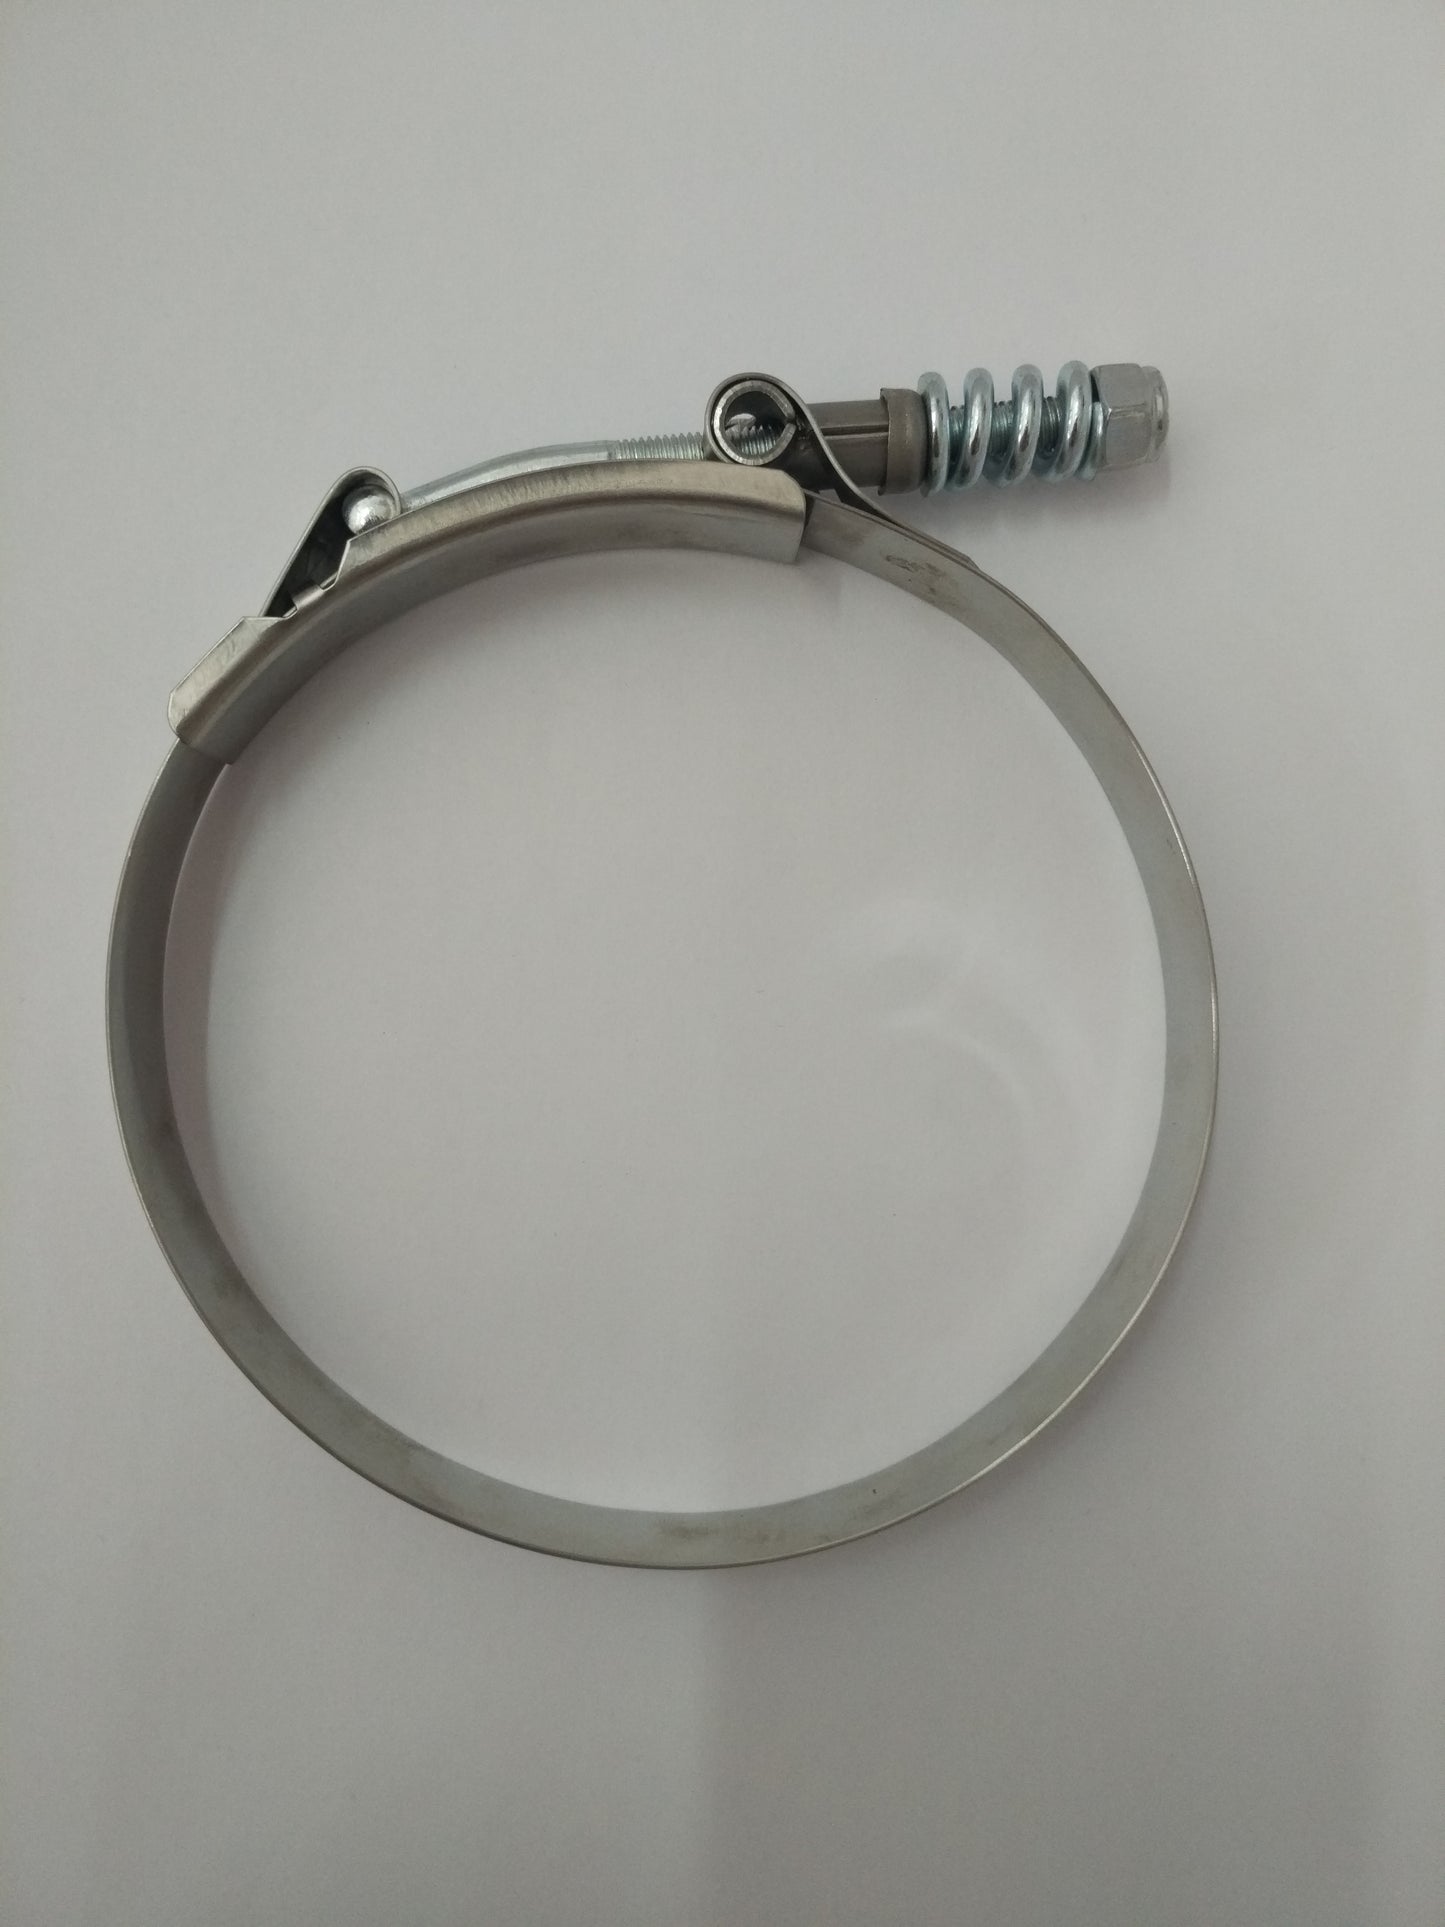 4-1/4 To 4-9/16 T-Bolt Spring Load Hose Clamp